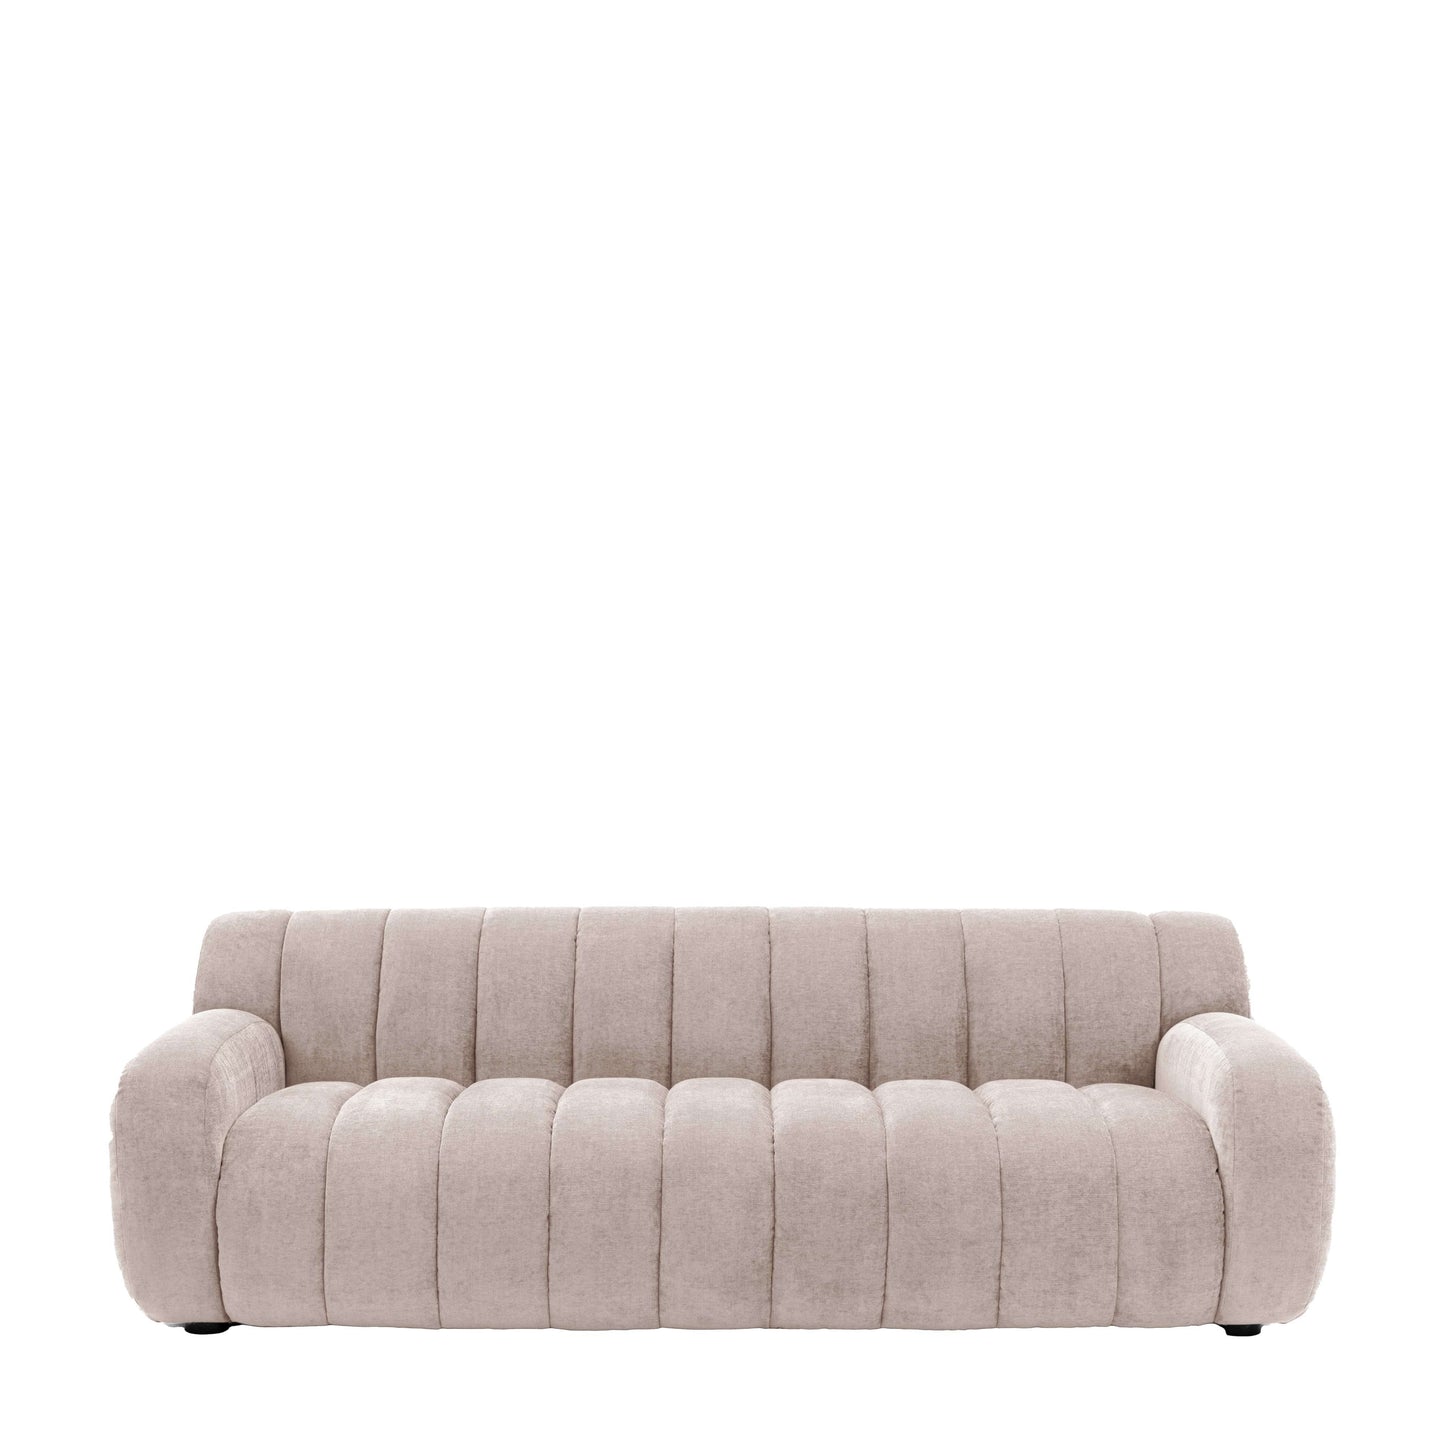 Coste 3 Seater Sofa - Colour Options